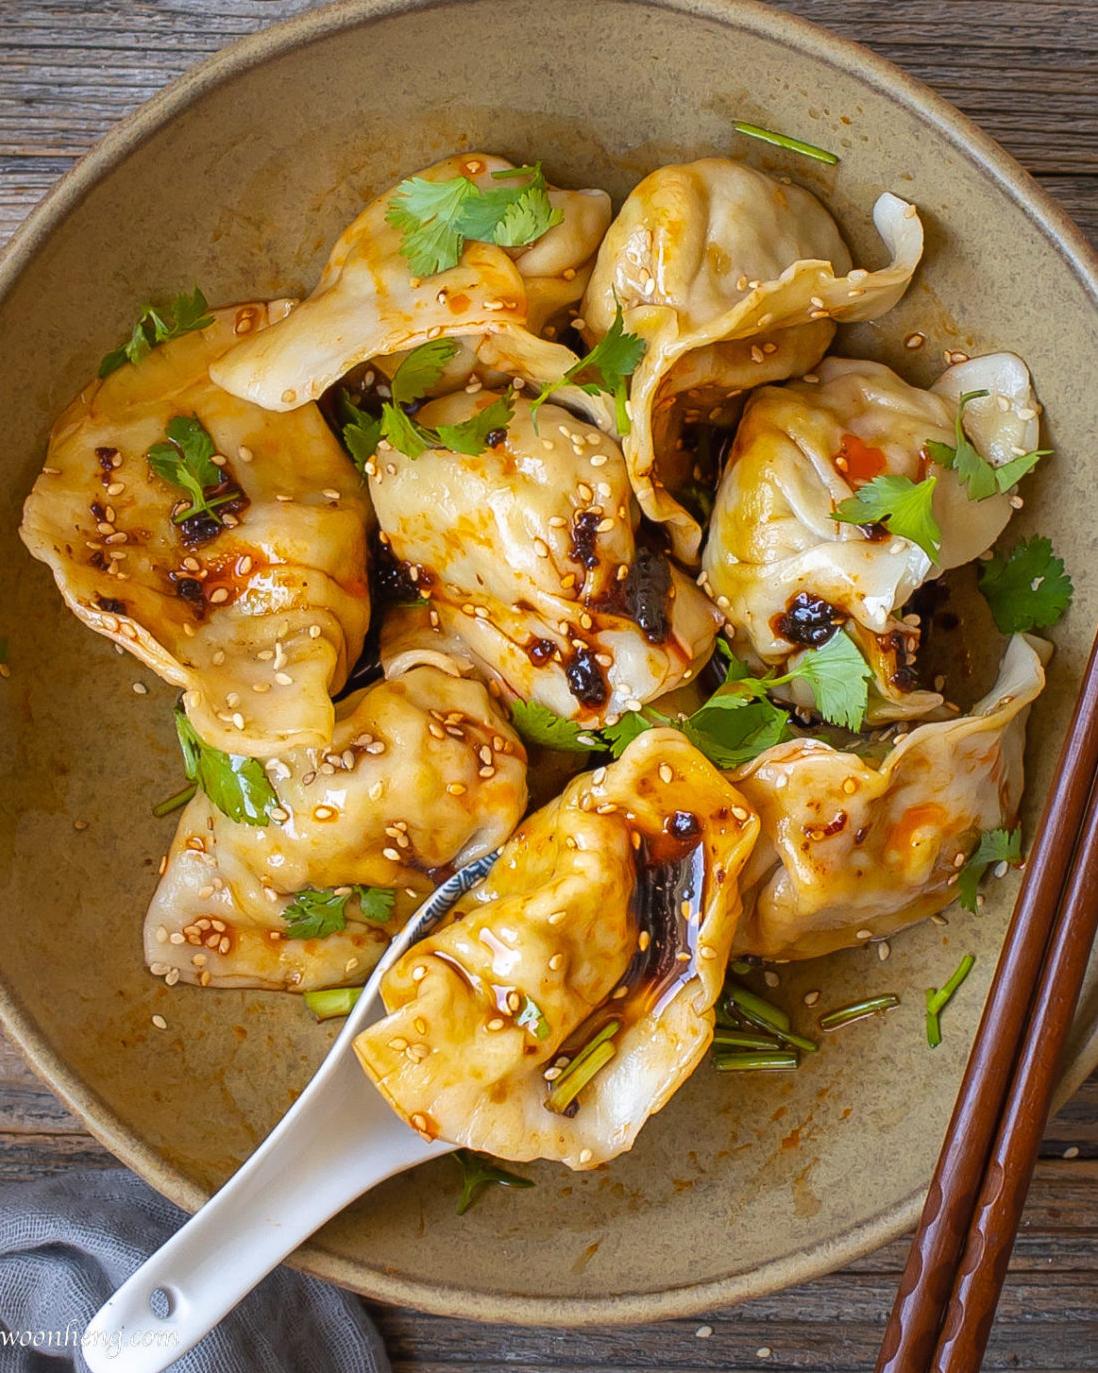  These tasty dumplings make the perfect appetizer or meal, and they are easy to make.